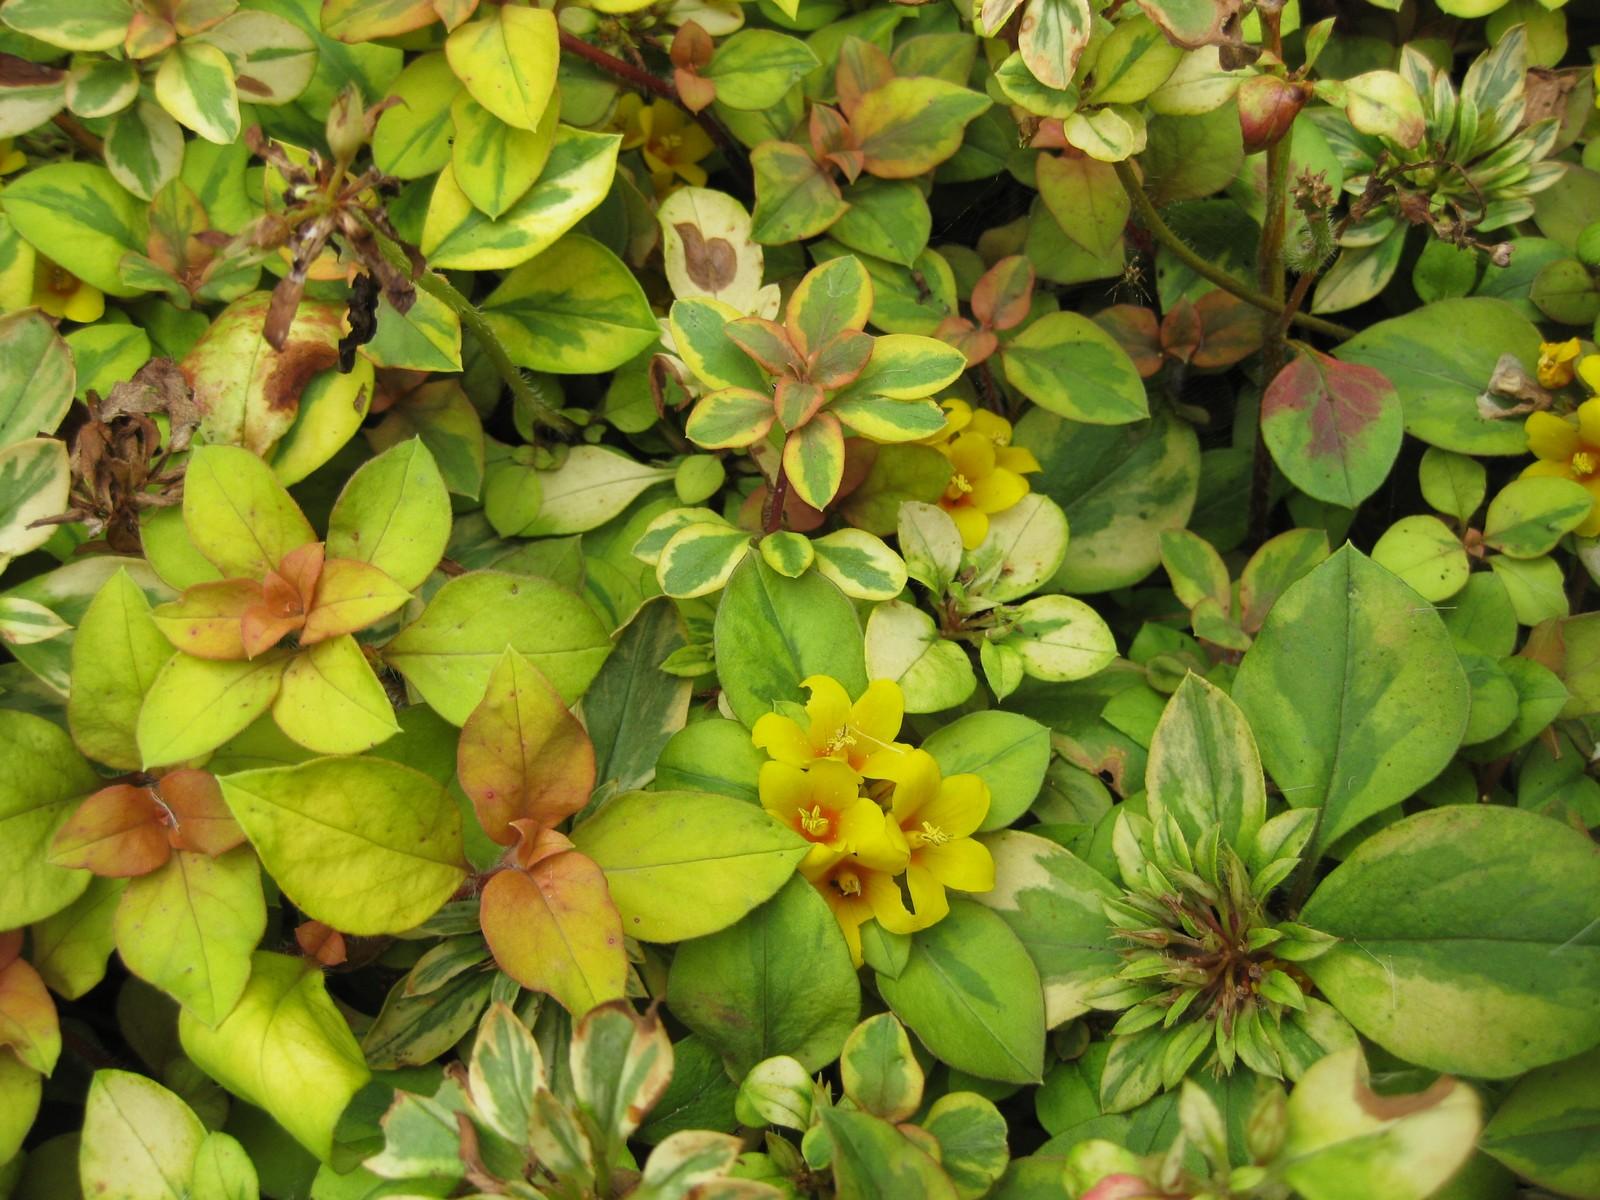 Yellow flowers with style and yellow stigma, red center and green-lime-burgundy leaves.
